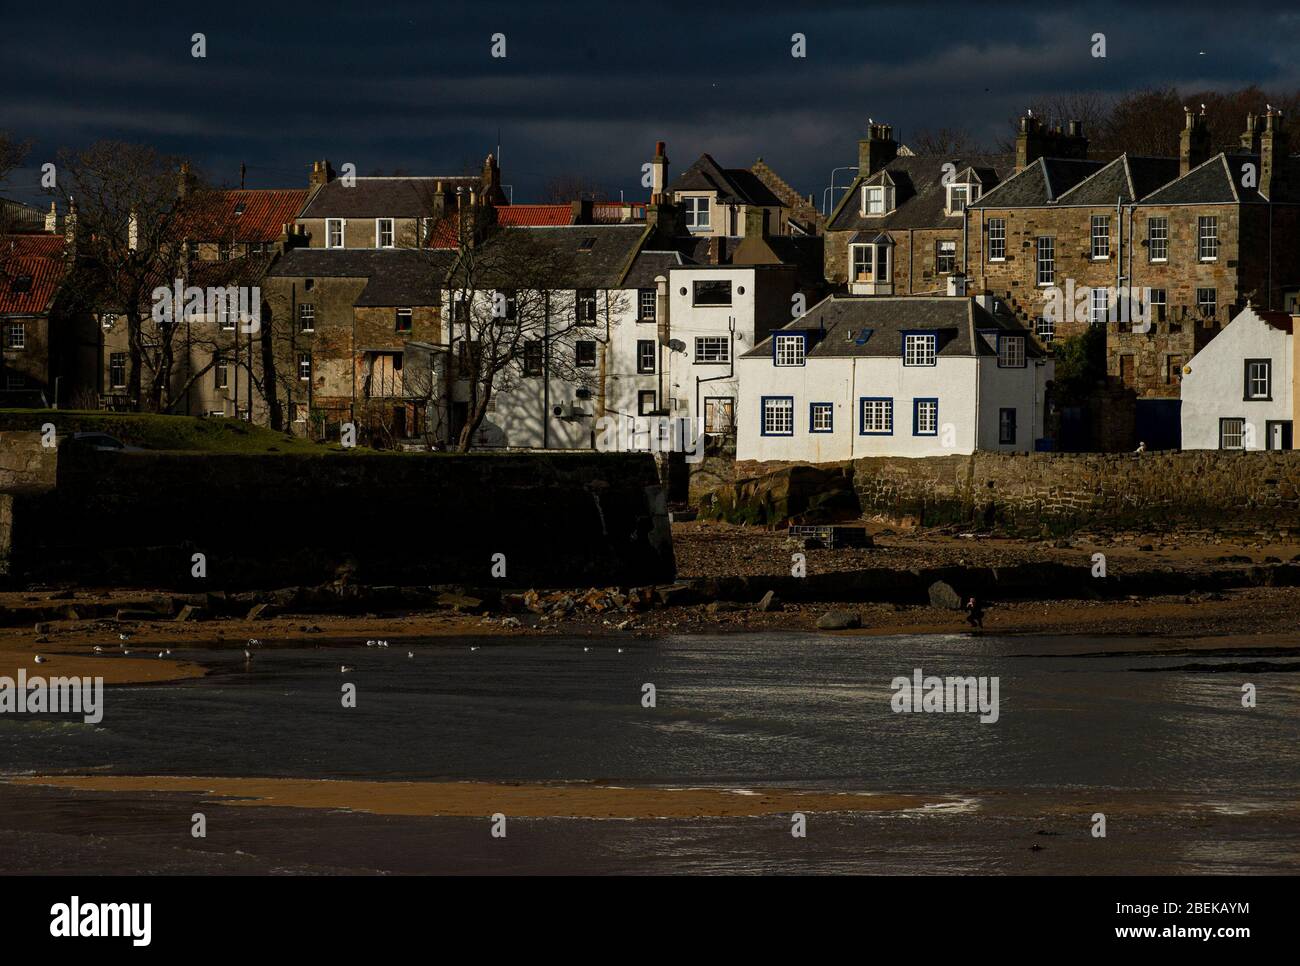 Anstruther, Fife, Scotland, UK The old fishing port of Anstruther in the East Neuk of Fife on the east coast of Scotland is now a popular tourist dest Stock Photo